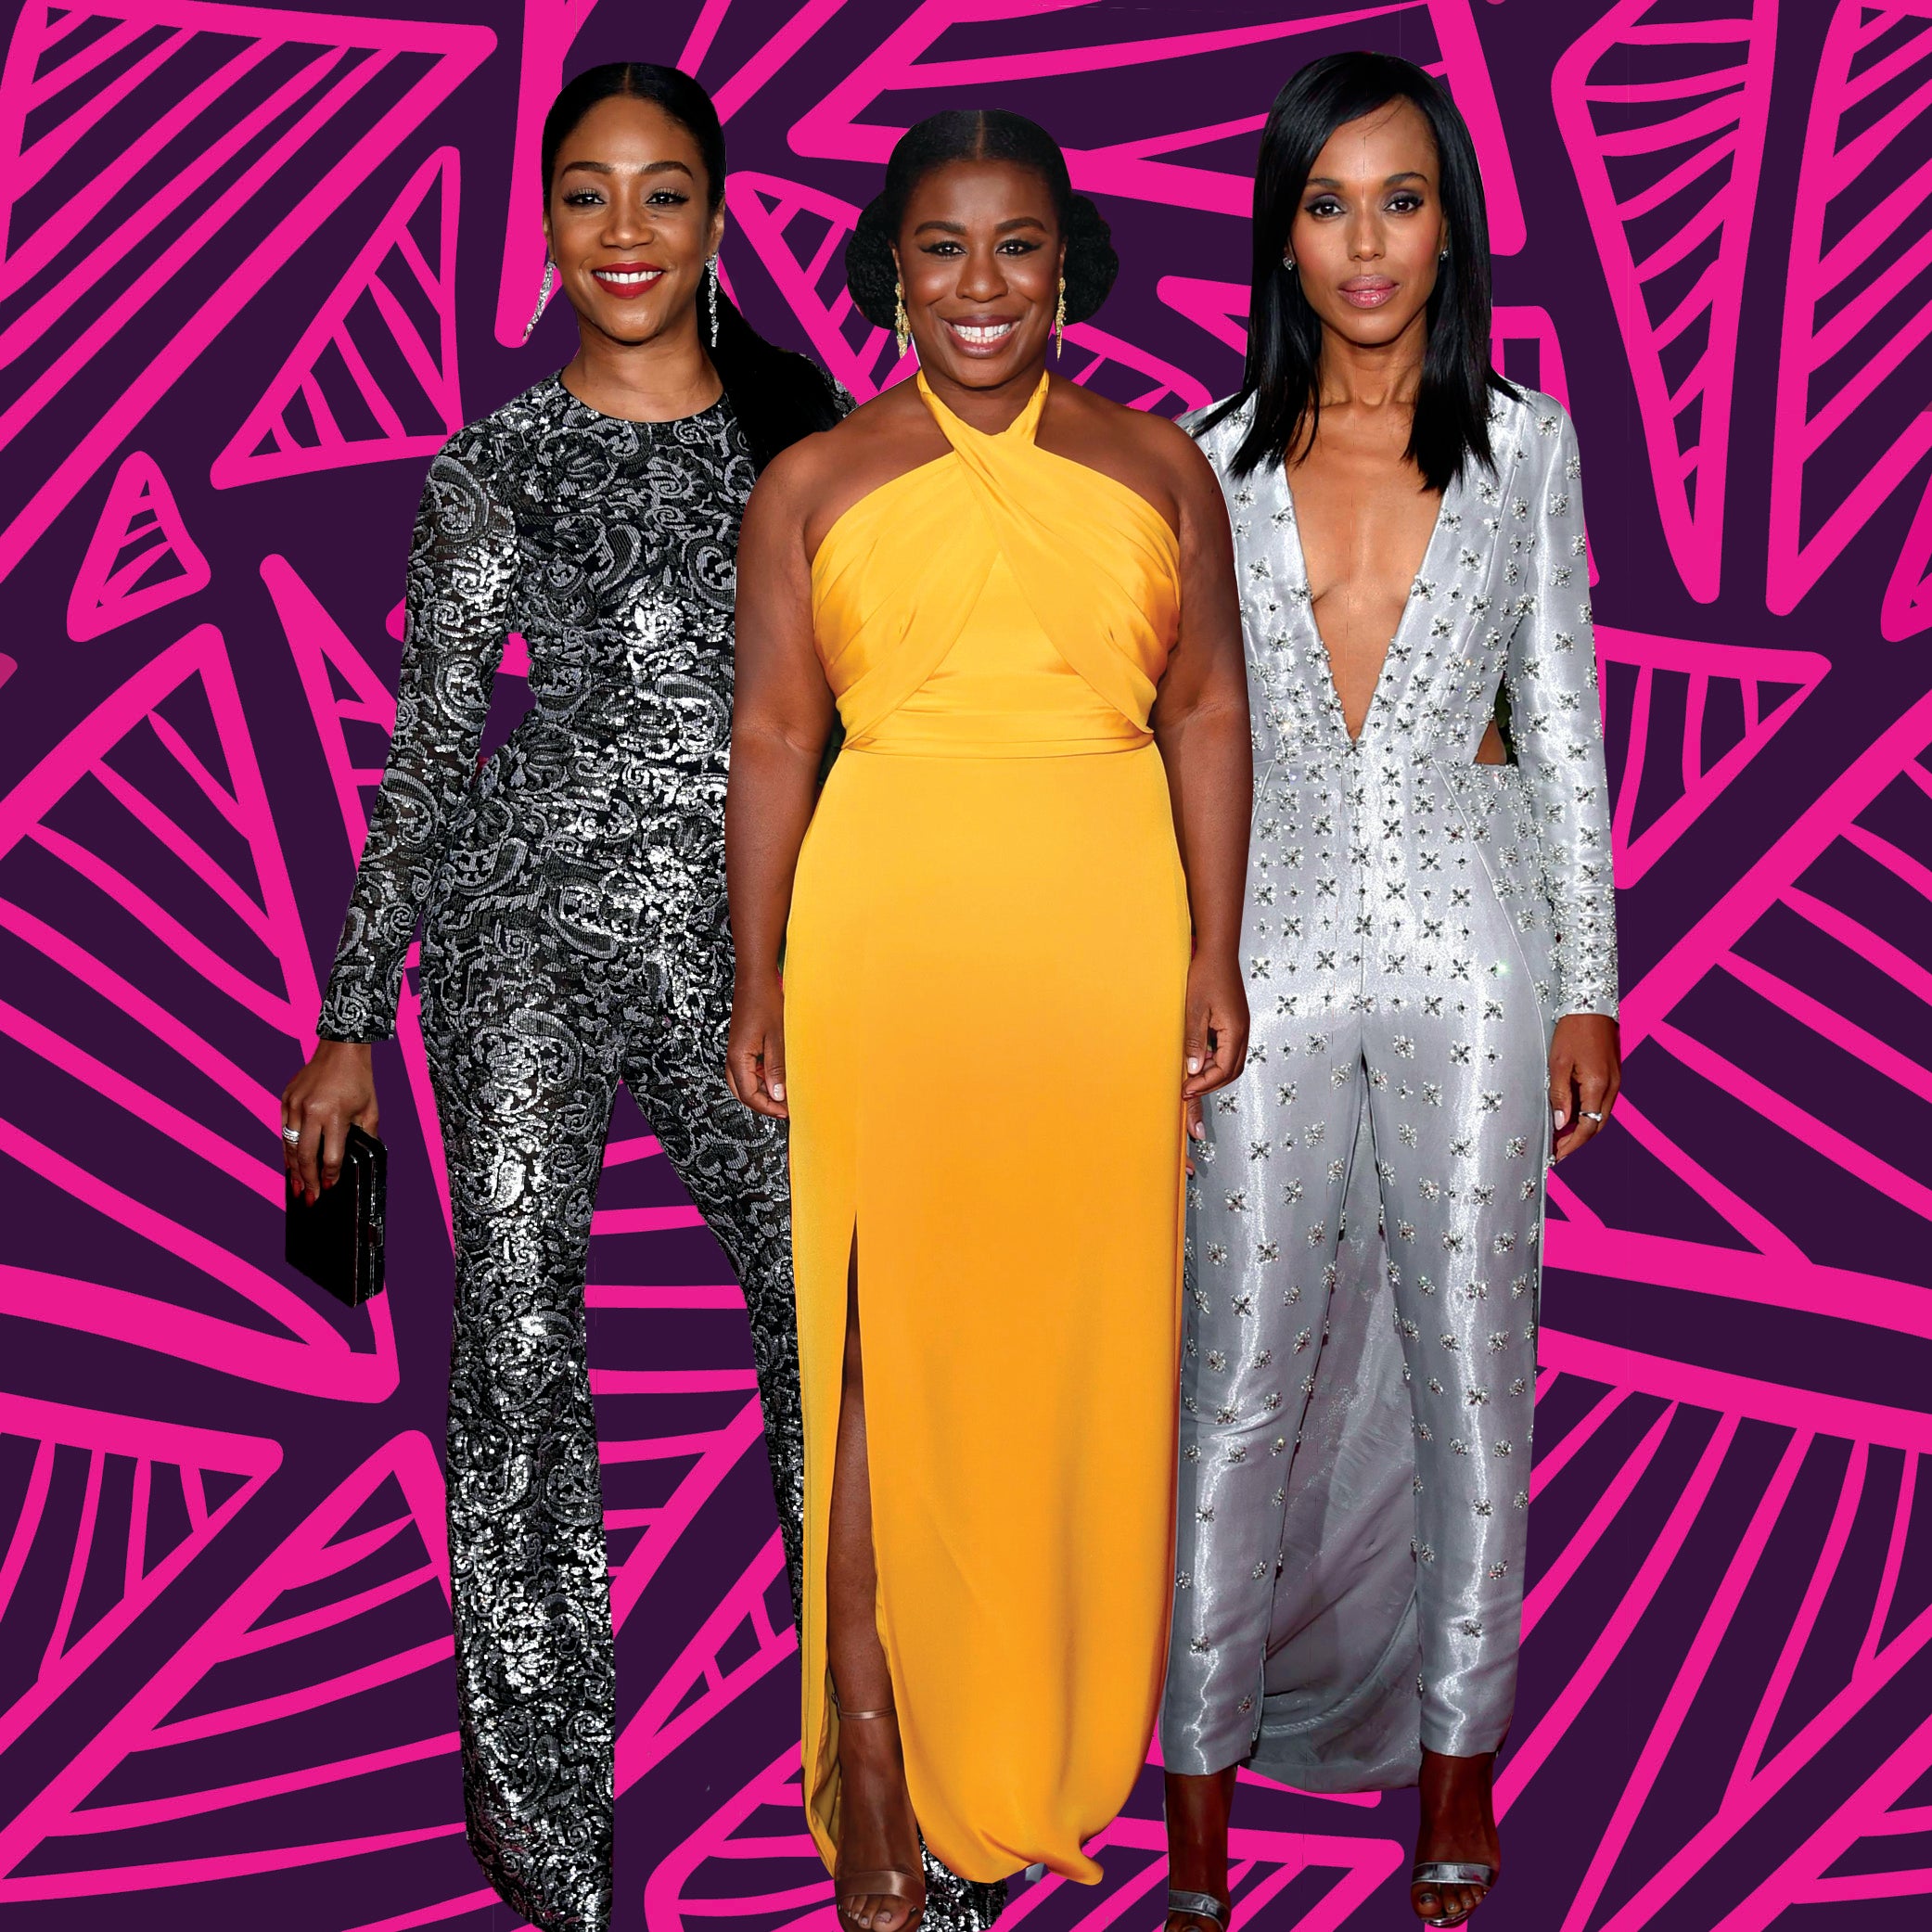 The 2018 Tony Awards Red Carpet Was Dazzling Per Usual, Just Look
